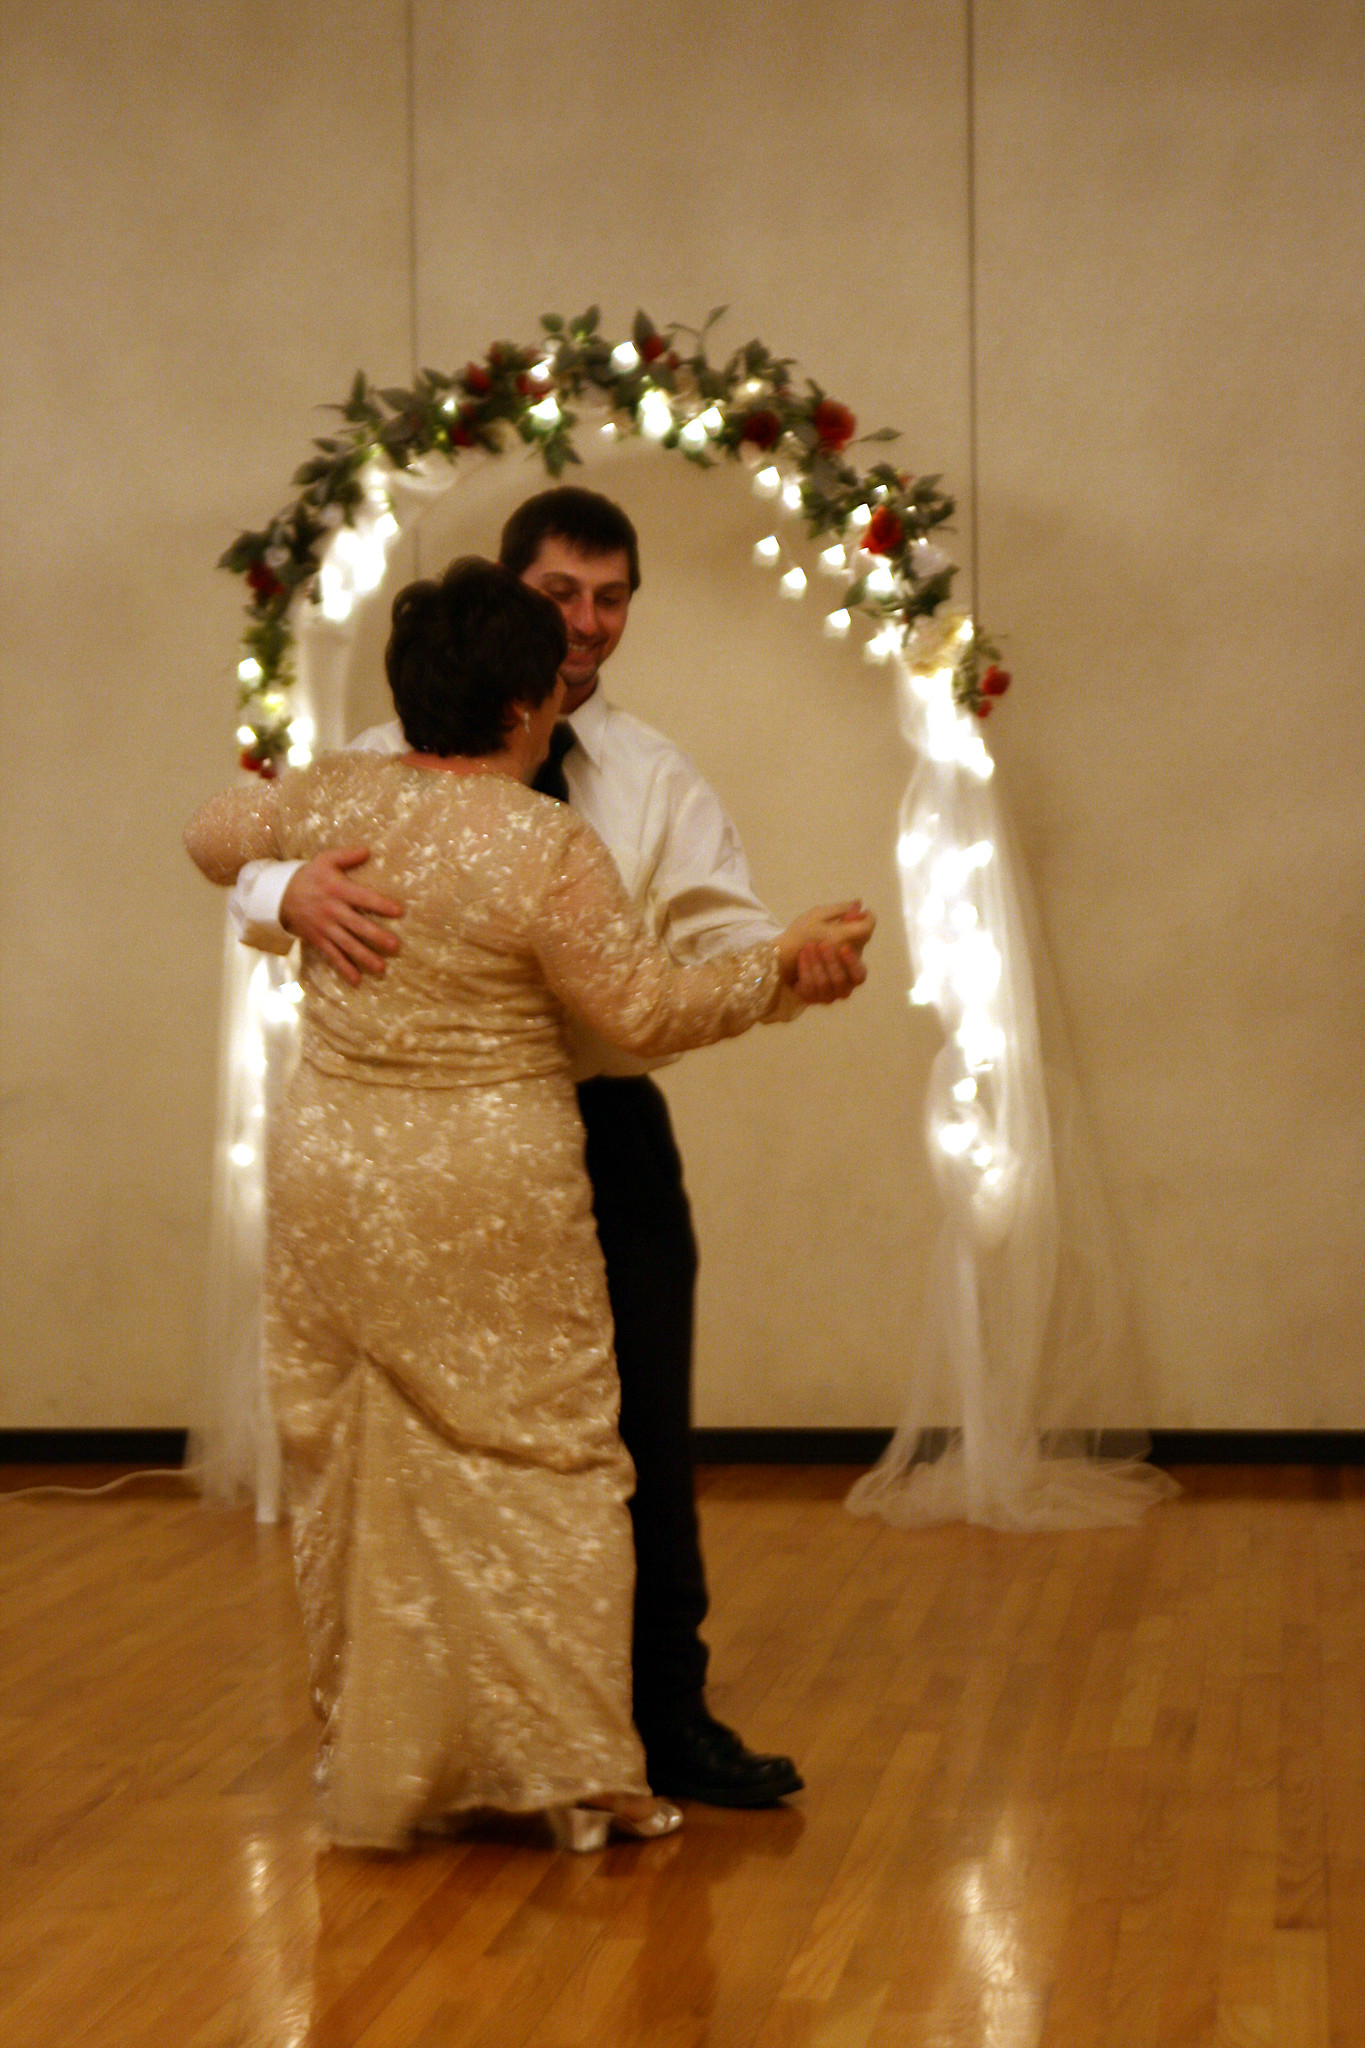 A son sharing a dance with his mother at his wedding | Source: Flickr